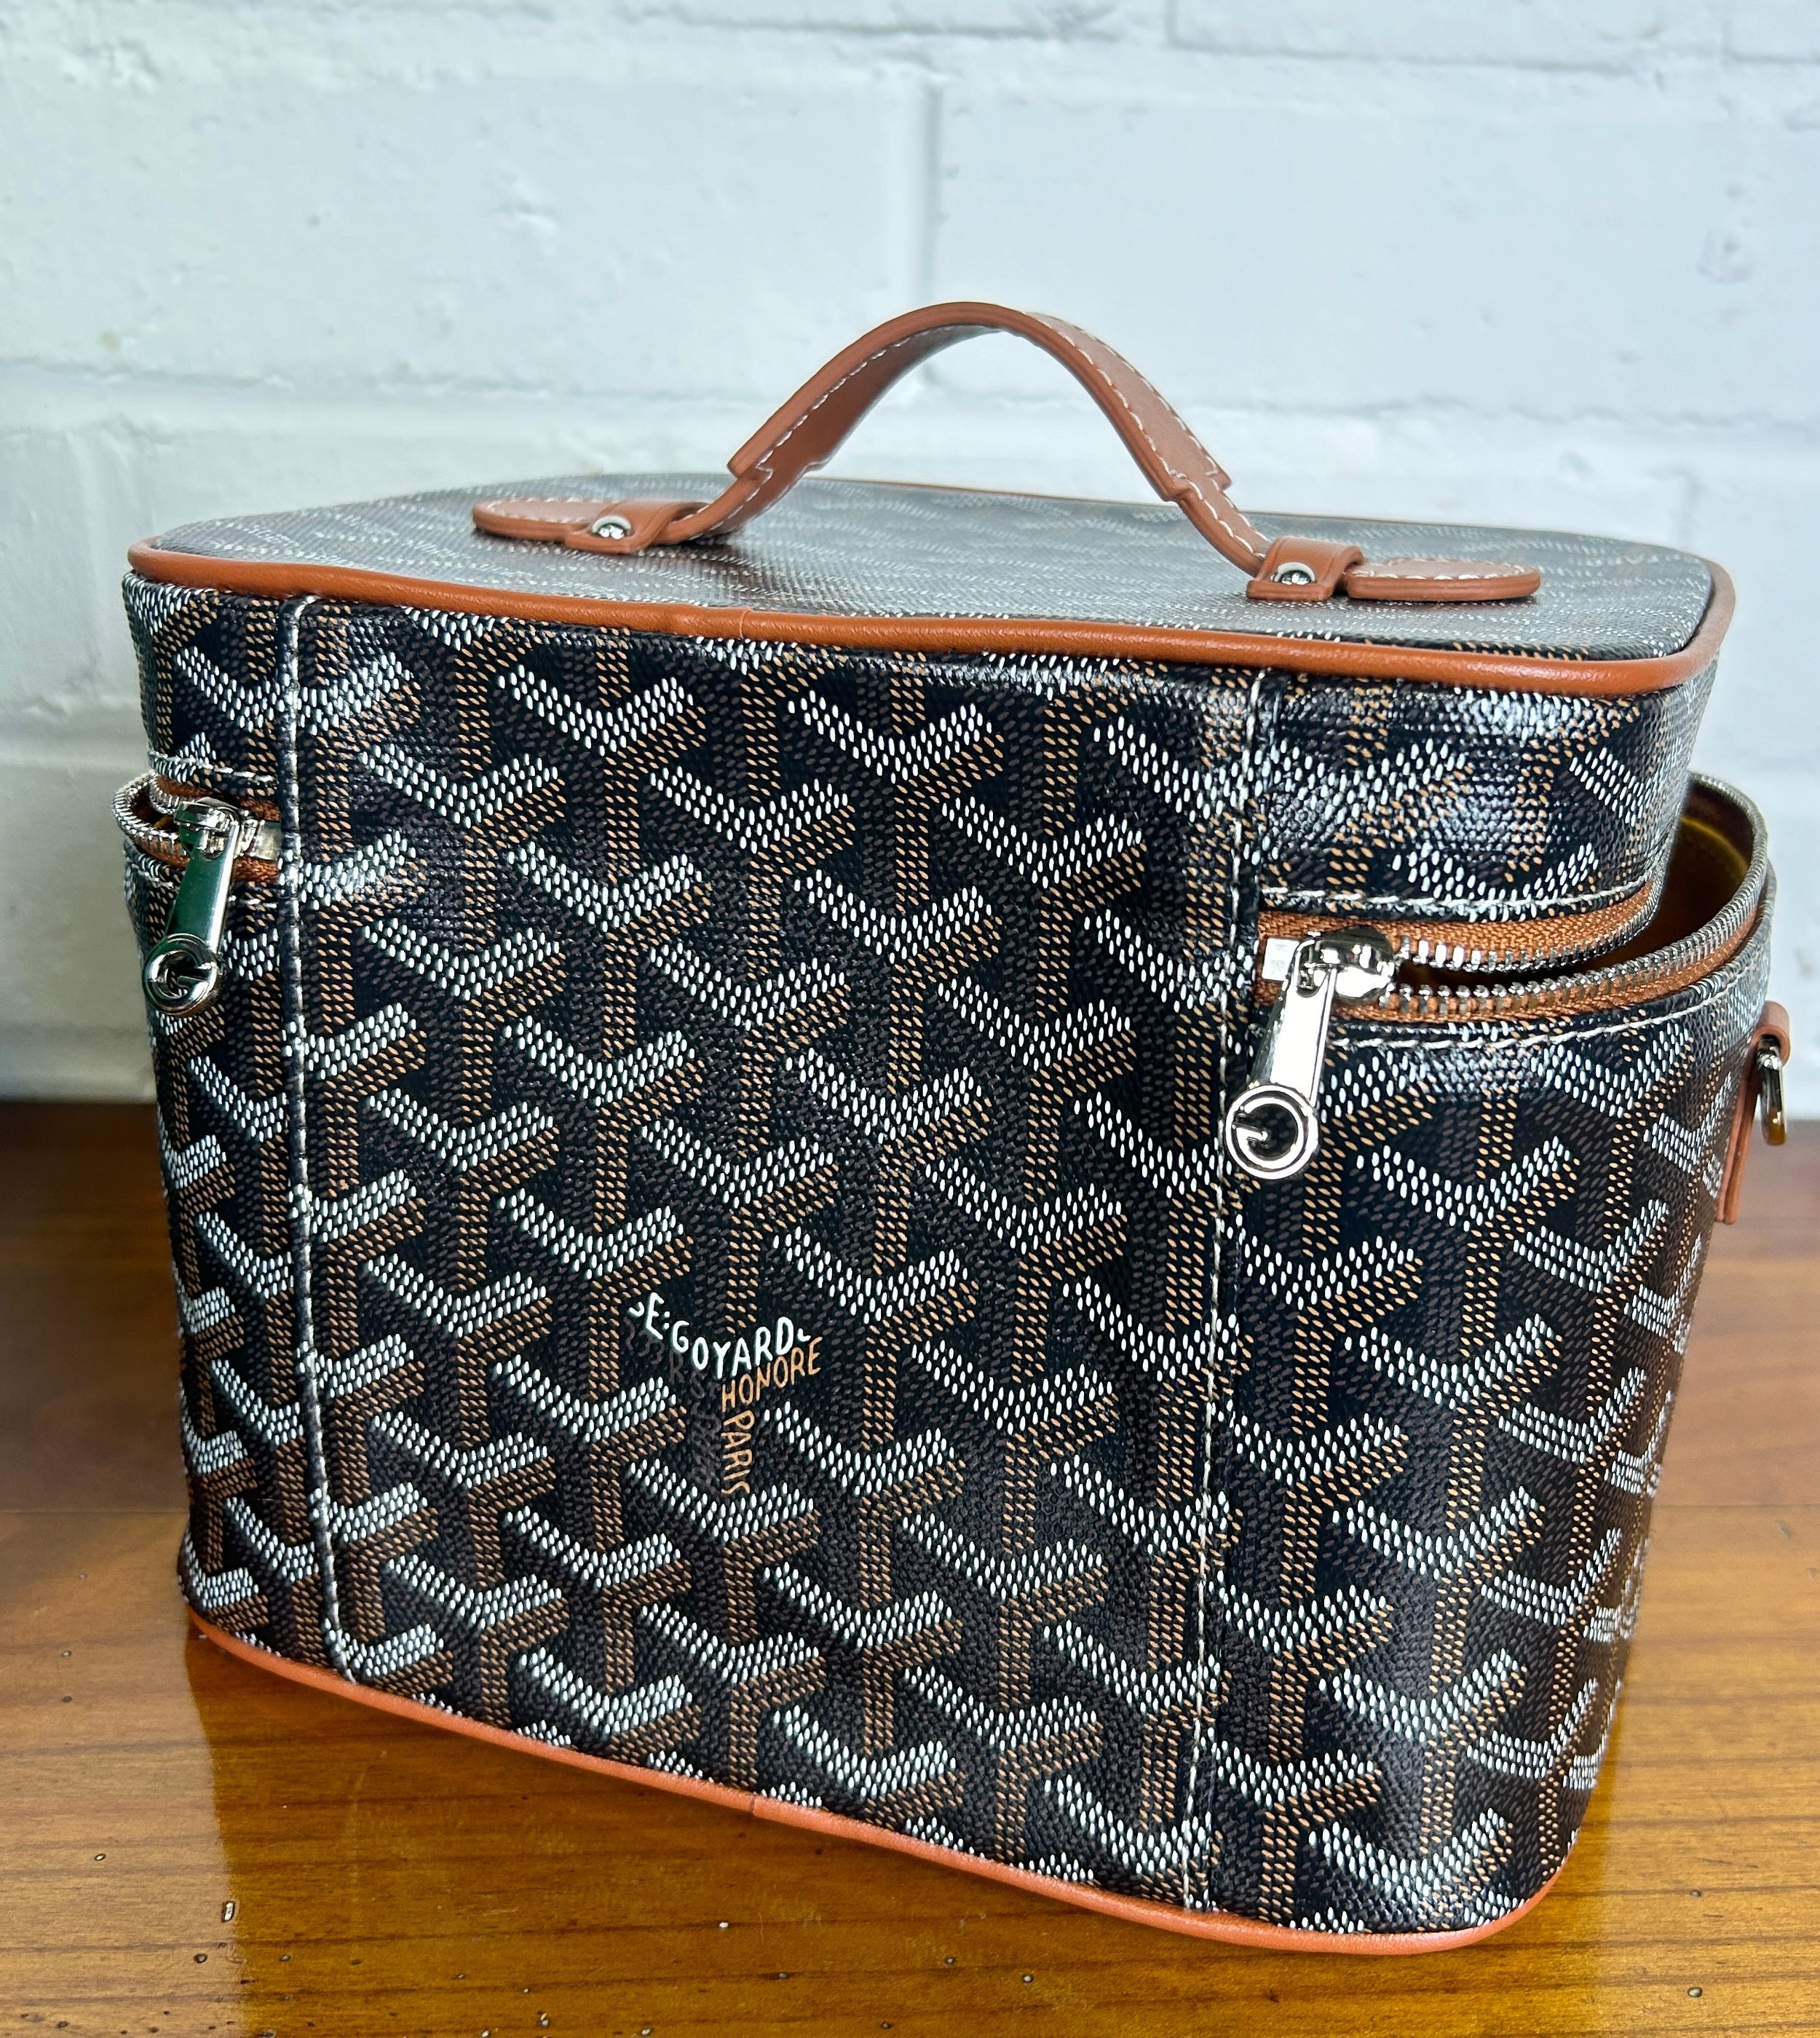 A GOYARD MUSE VANITY CASE IN BLACK AND TAN, With box. - Image 3 of 7